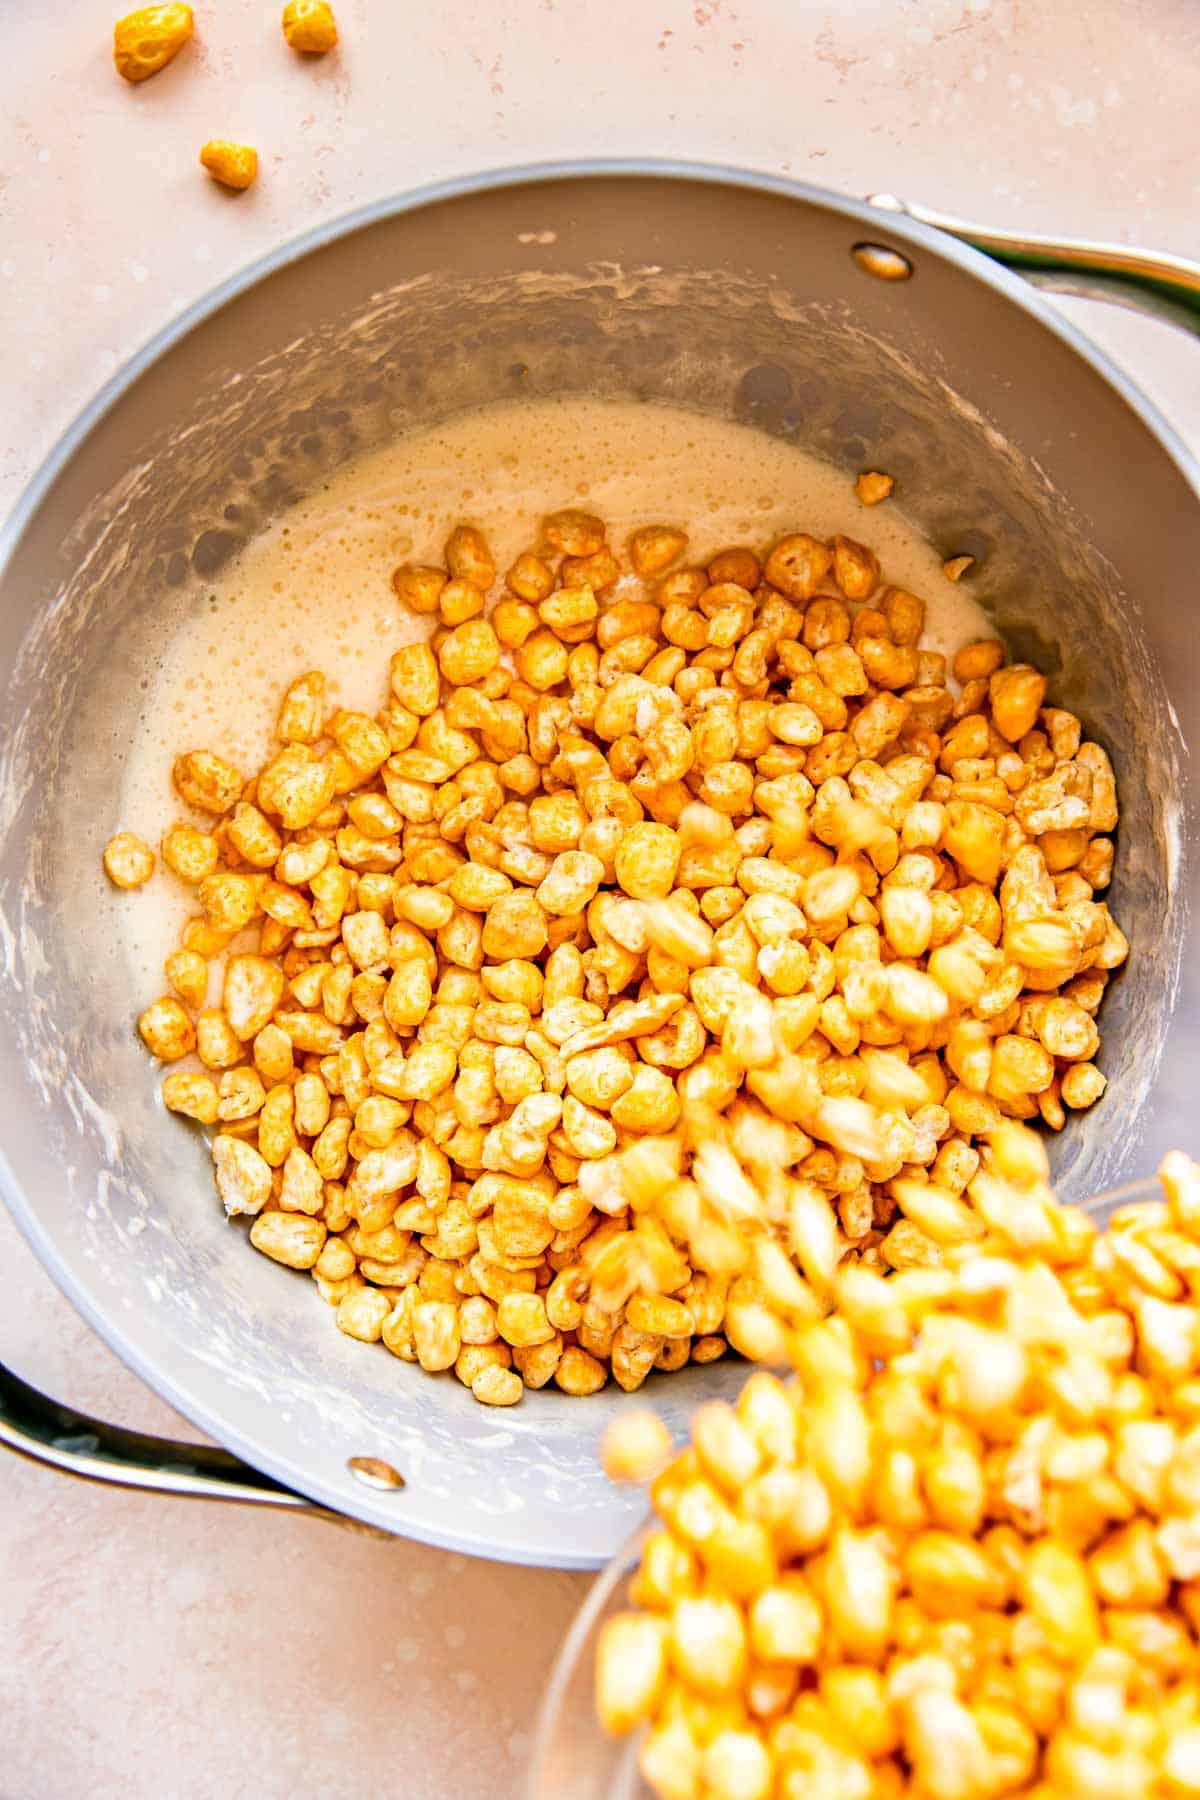 Corn Pops cereal is being added to a pan. 